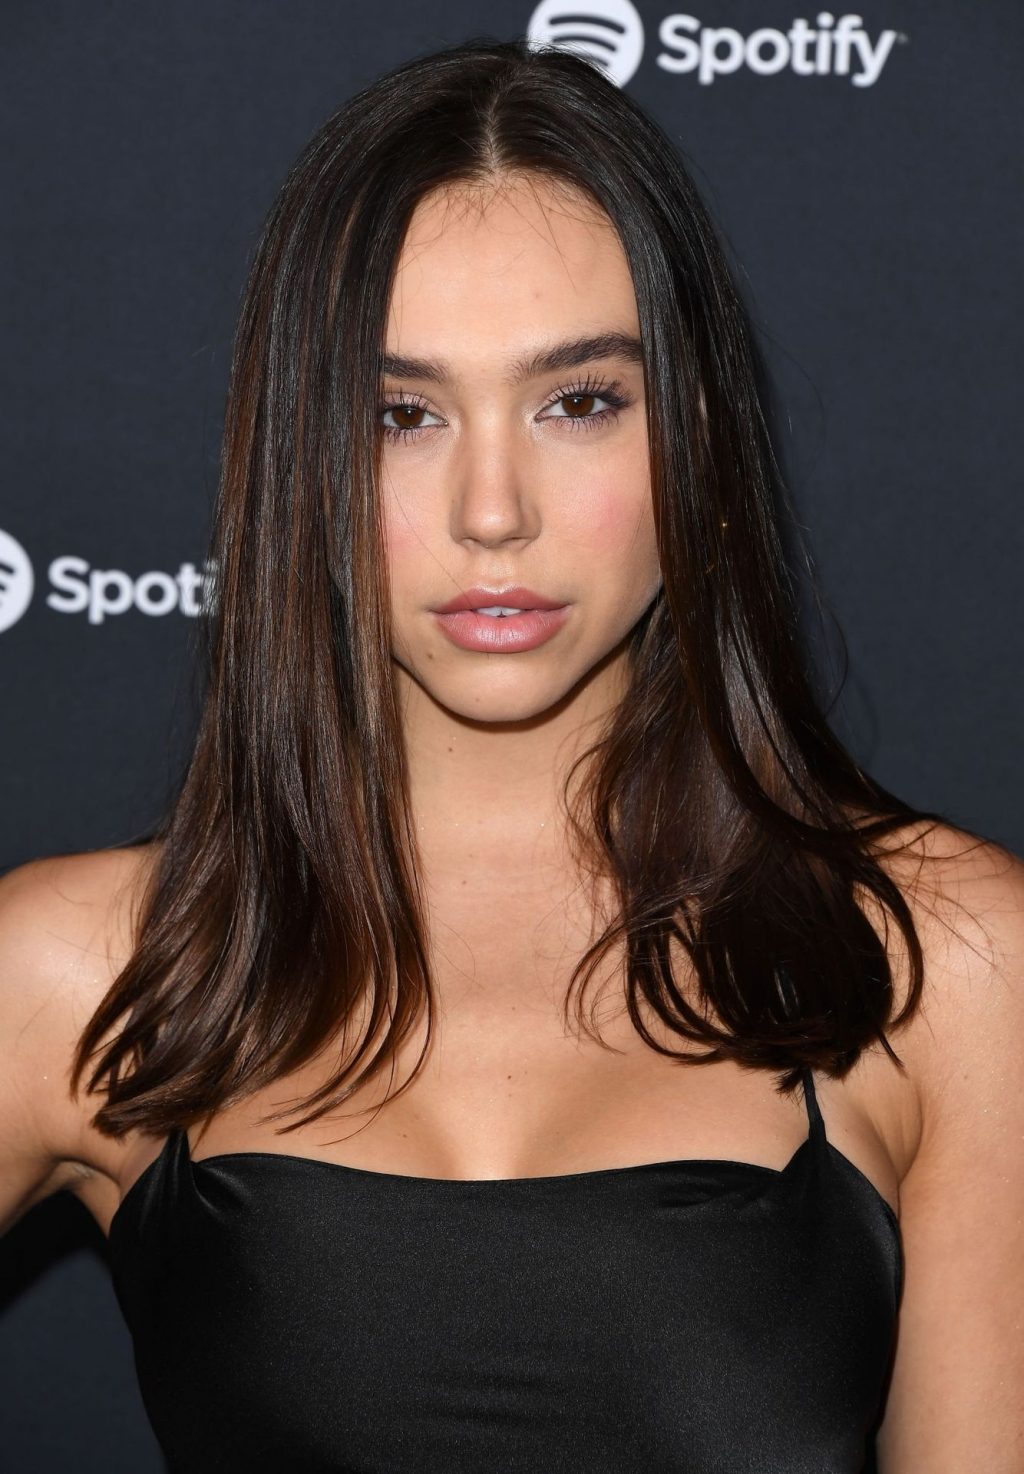 Alexis Ren Shows Off Her Tits at the Spotify Best New Artist Party (18 Photos)